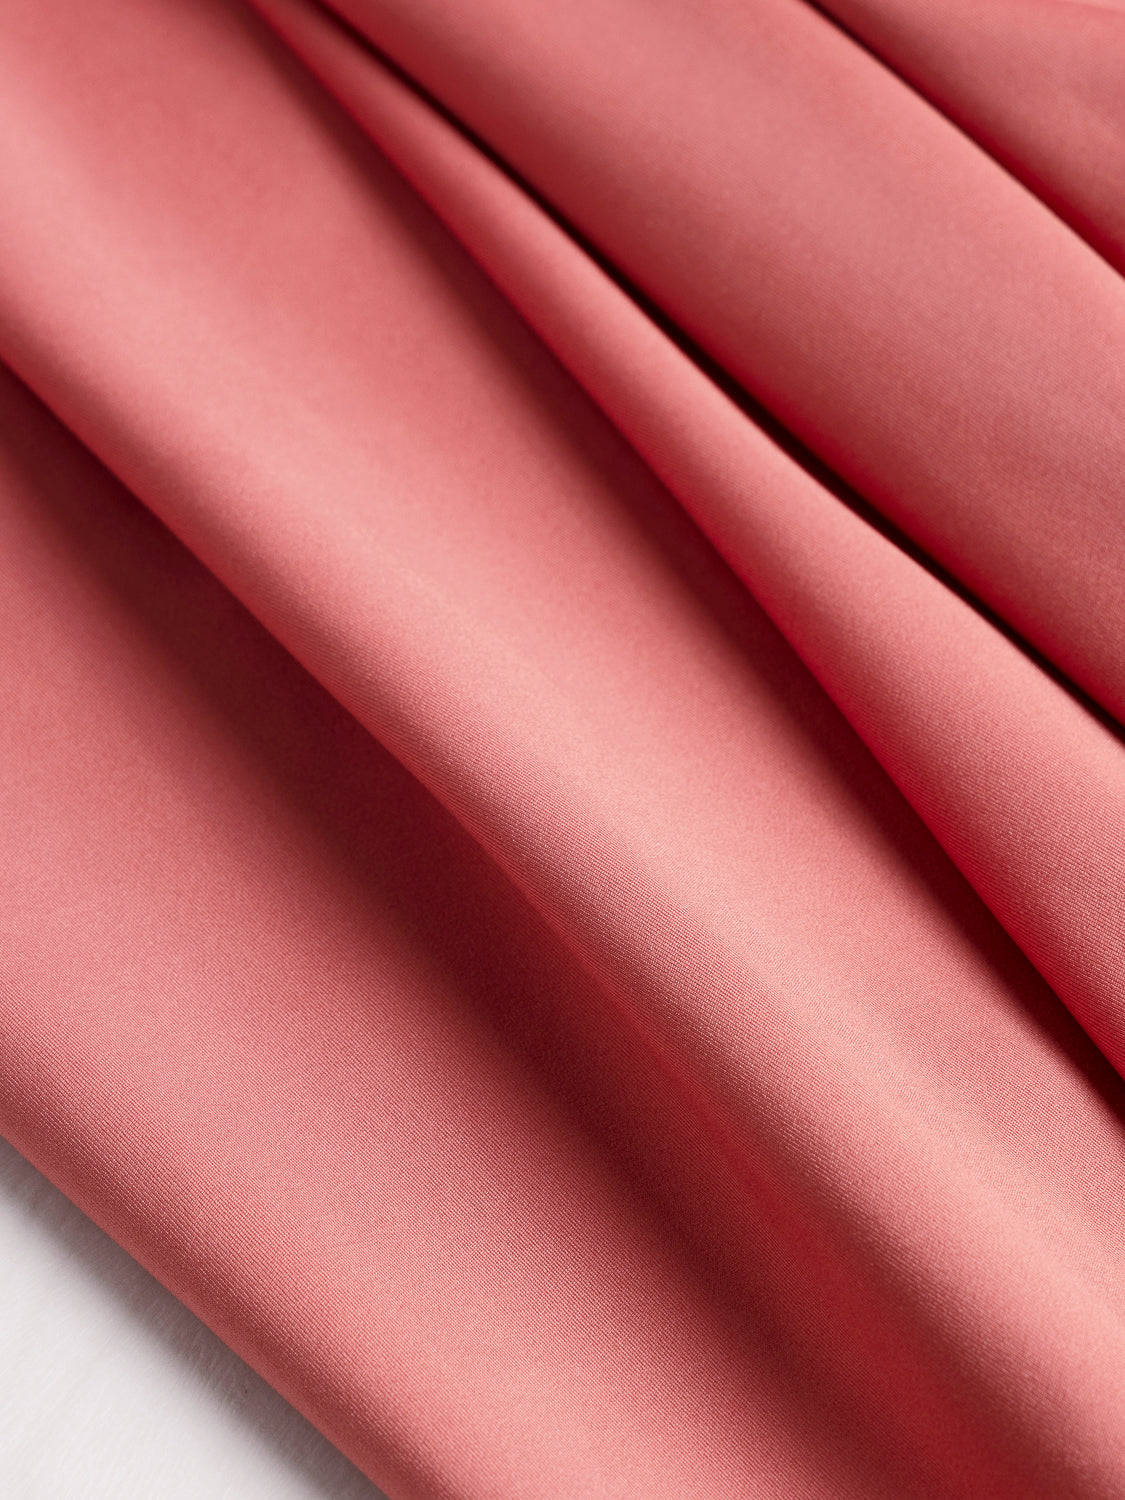 Heathered Pale Red Athletic Activewear High Performance Poly Spandex Fabric  By The Yard by The Yard 